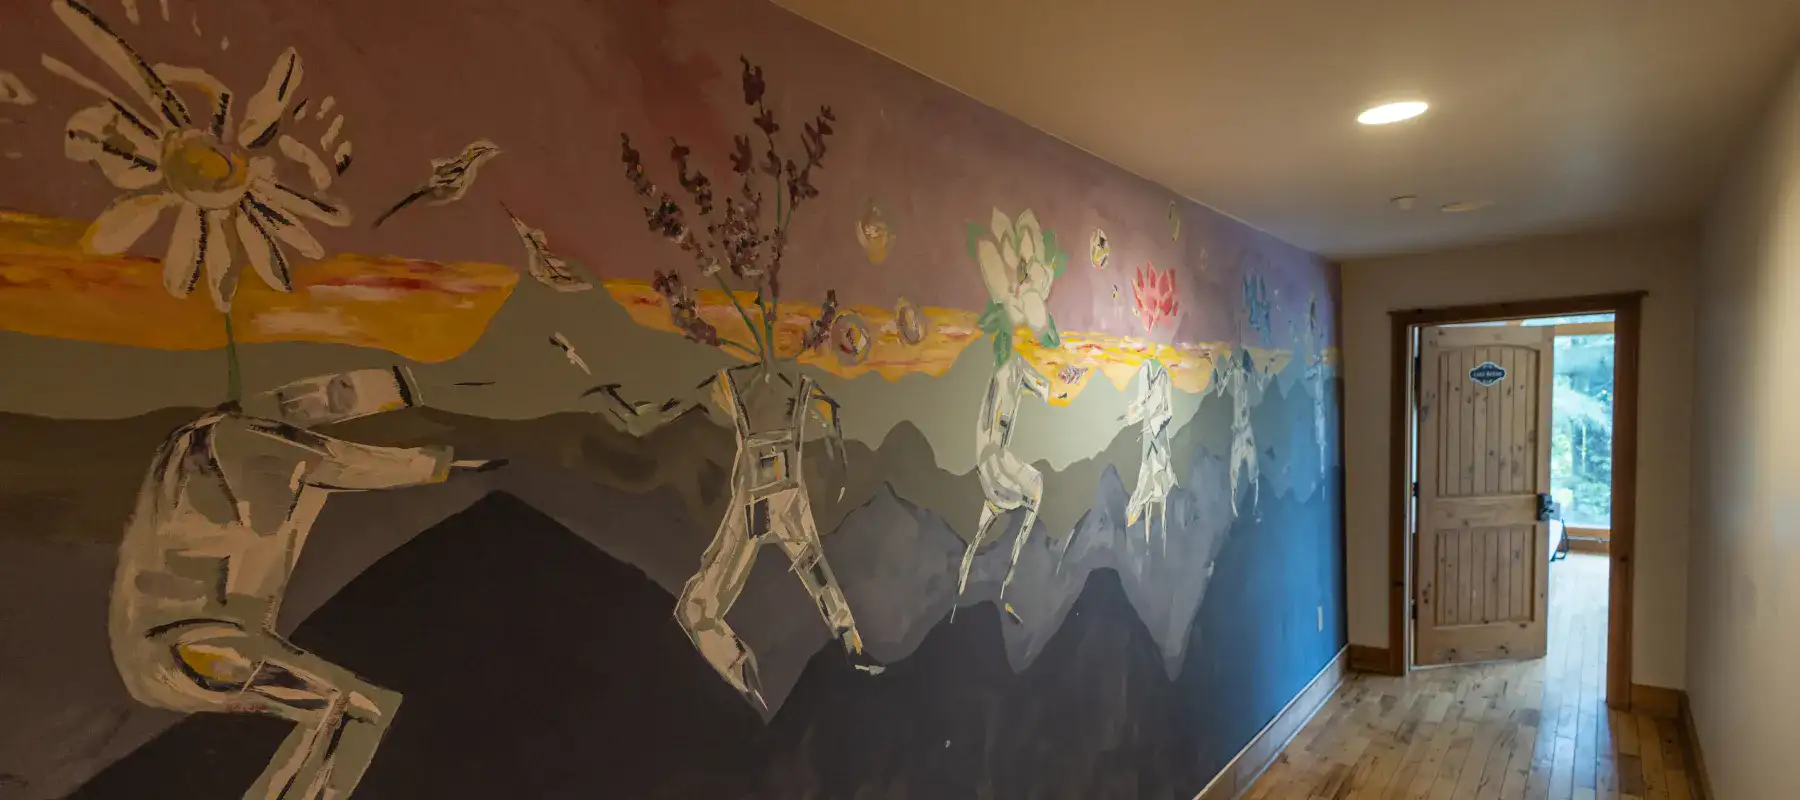 Painted art mural in the hallway at Lake House Academy